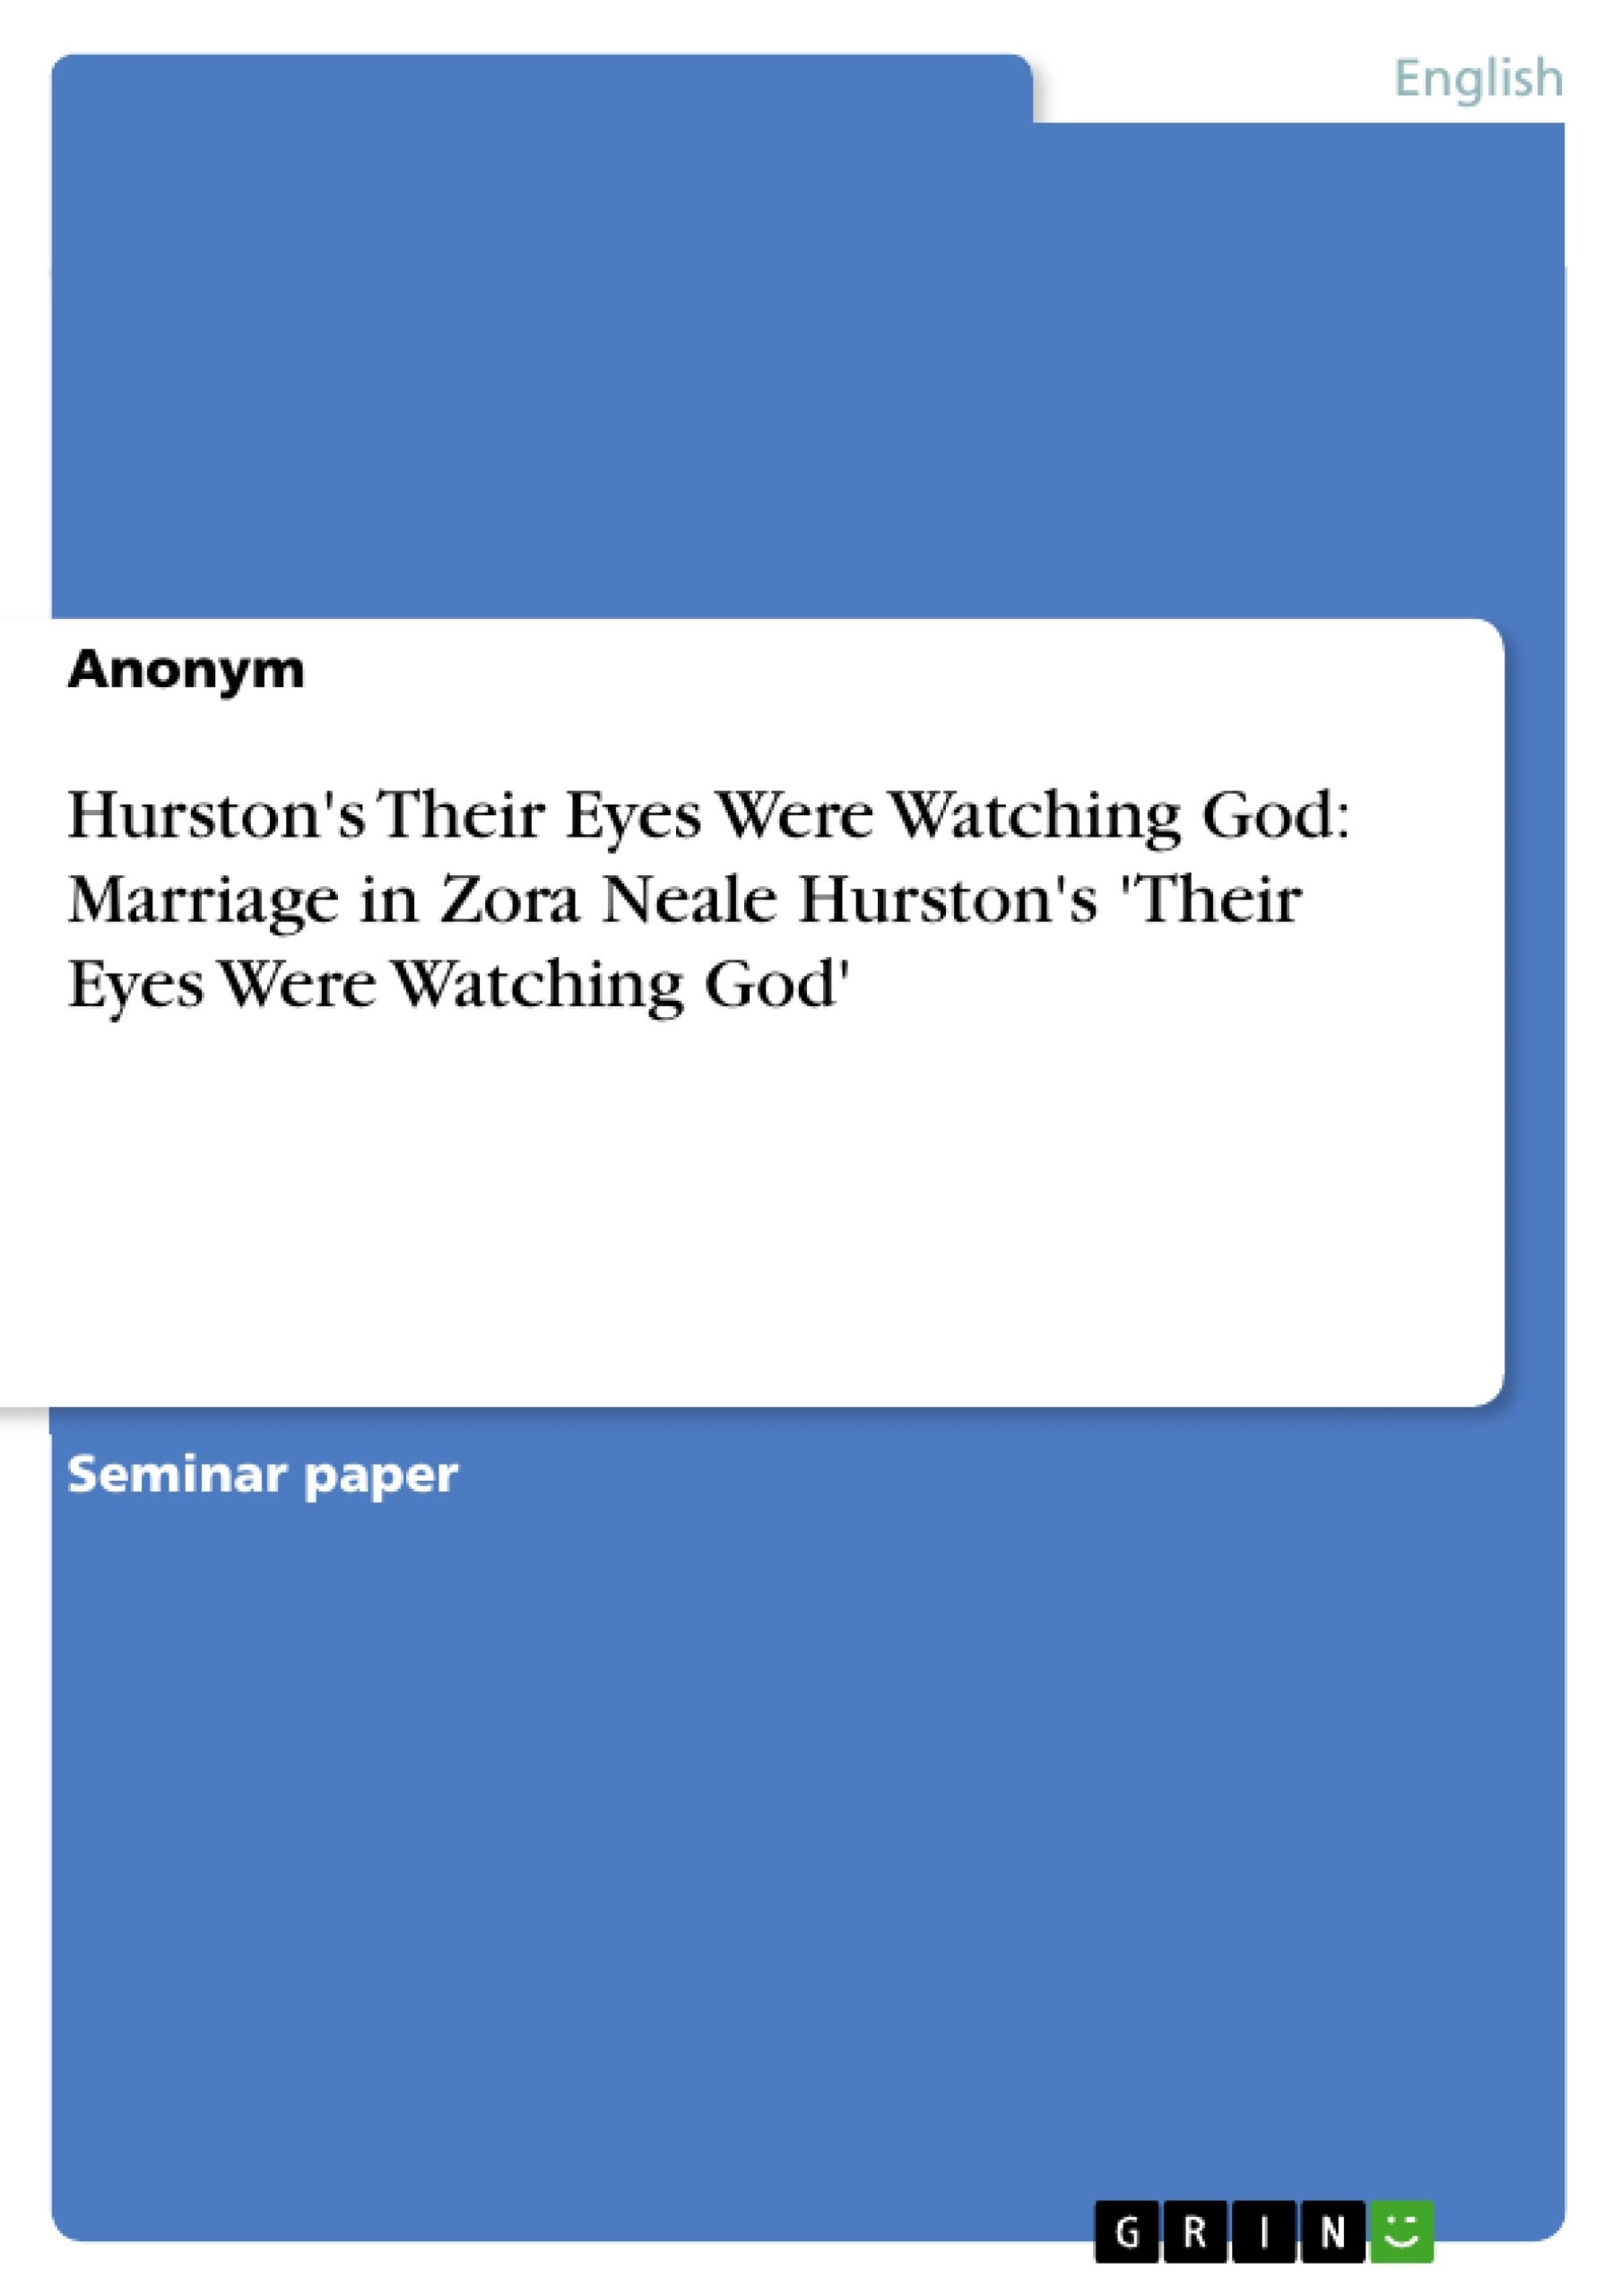 Título: Hurston's Their Eyes Were Watching God: Marriage in Zora Neale Hurston's 'Their Eyes Were Watching God'